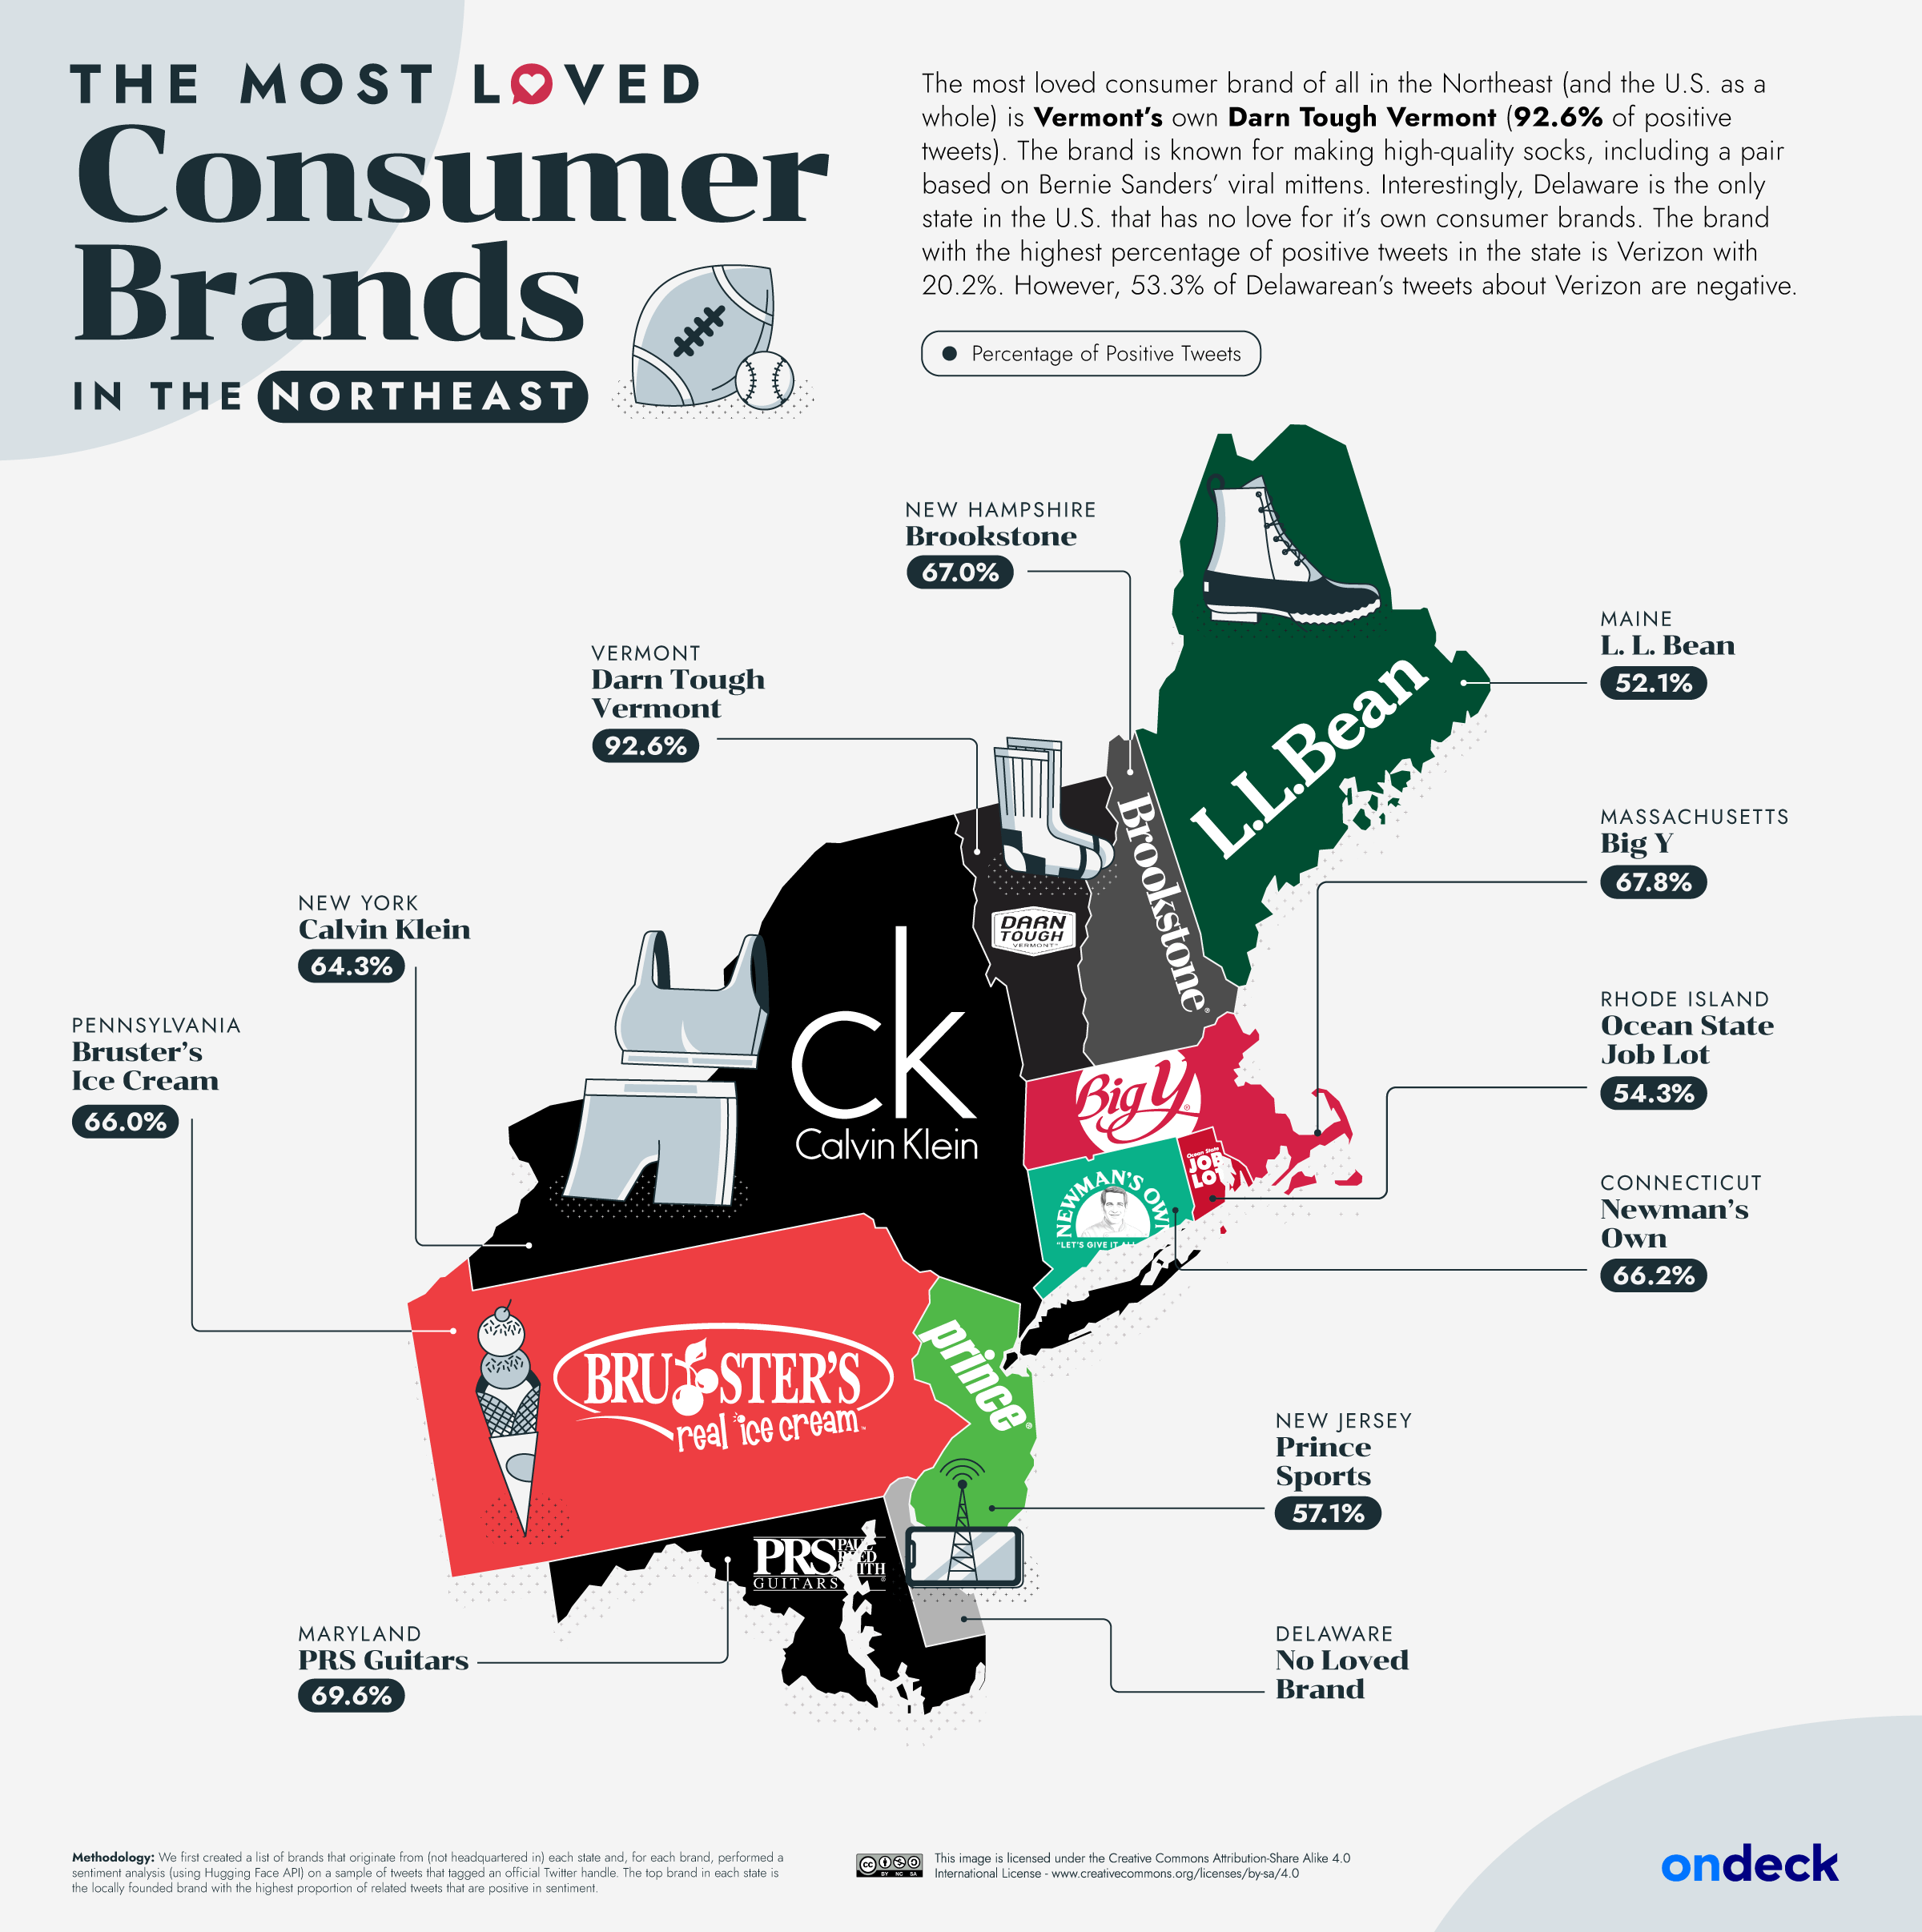 Map of the most loved consumer brands in the U.S. Northeast